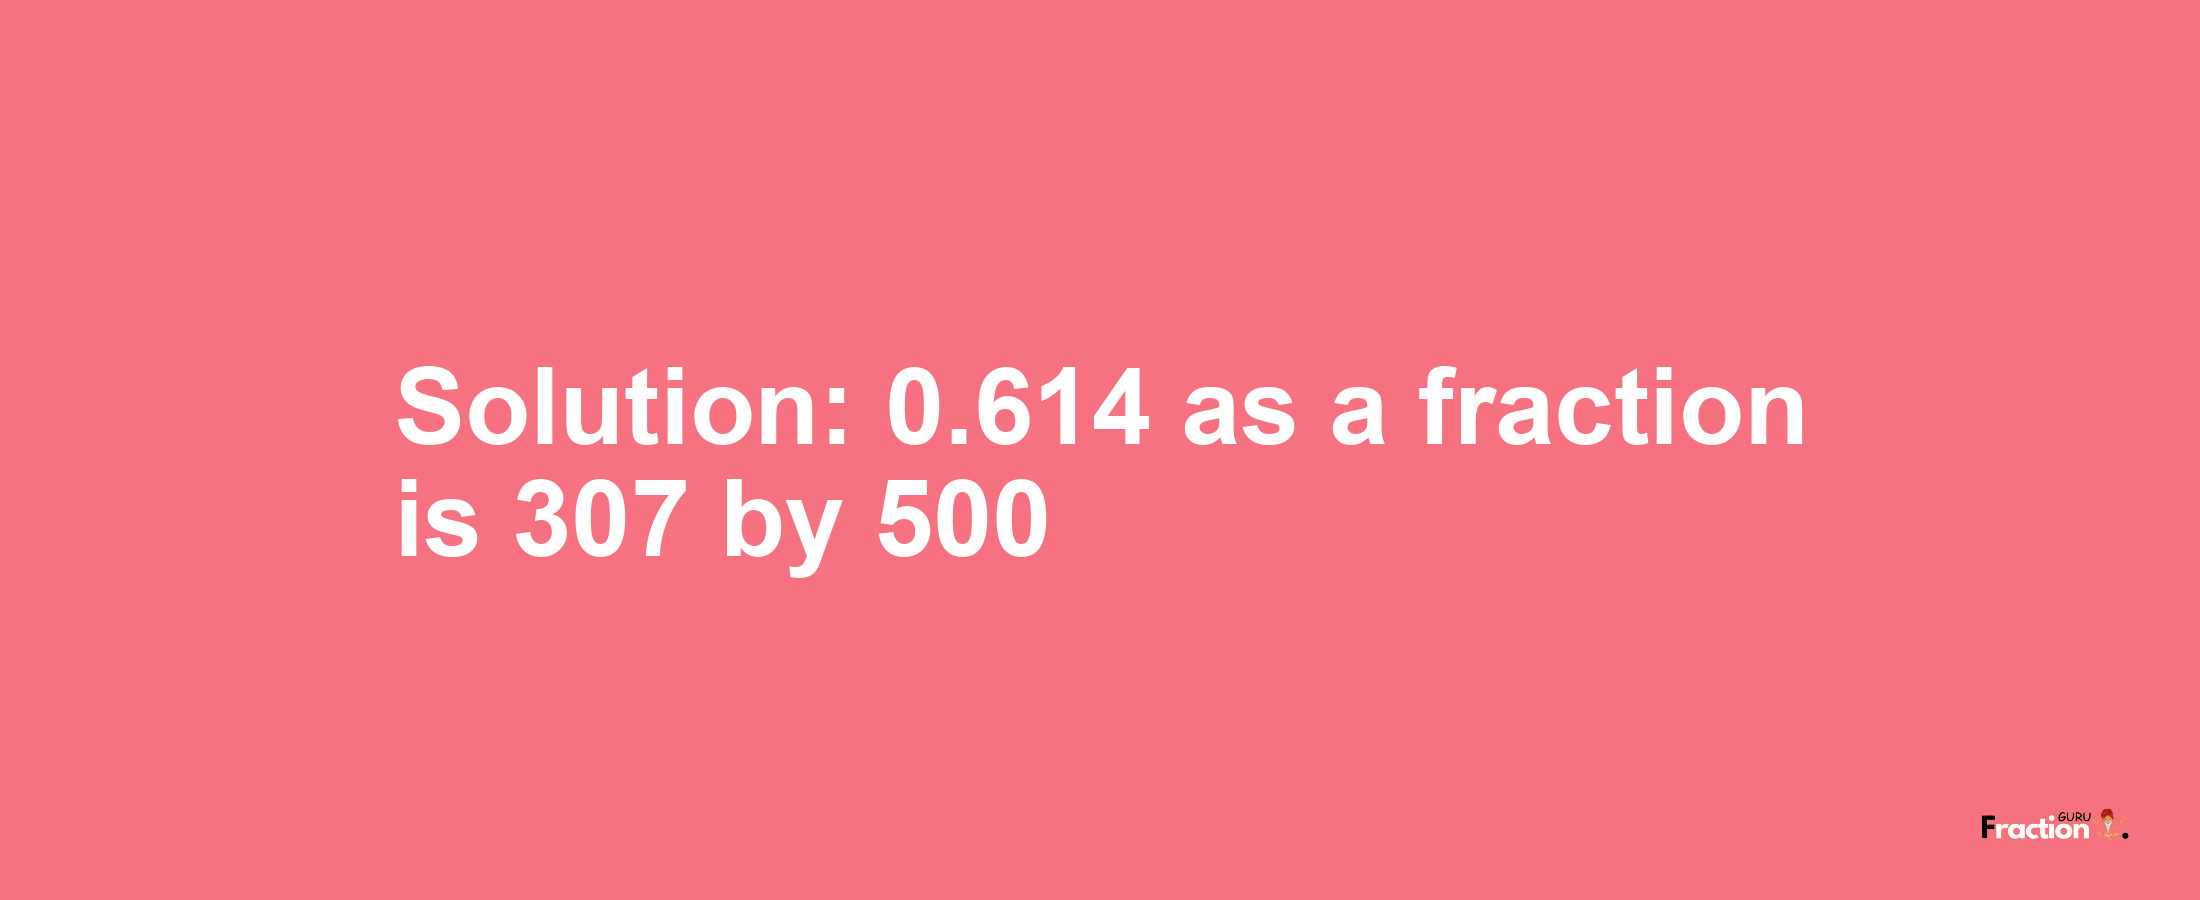 Solution:0.614 as a fraction is 307/500